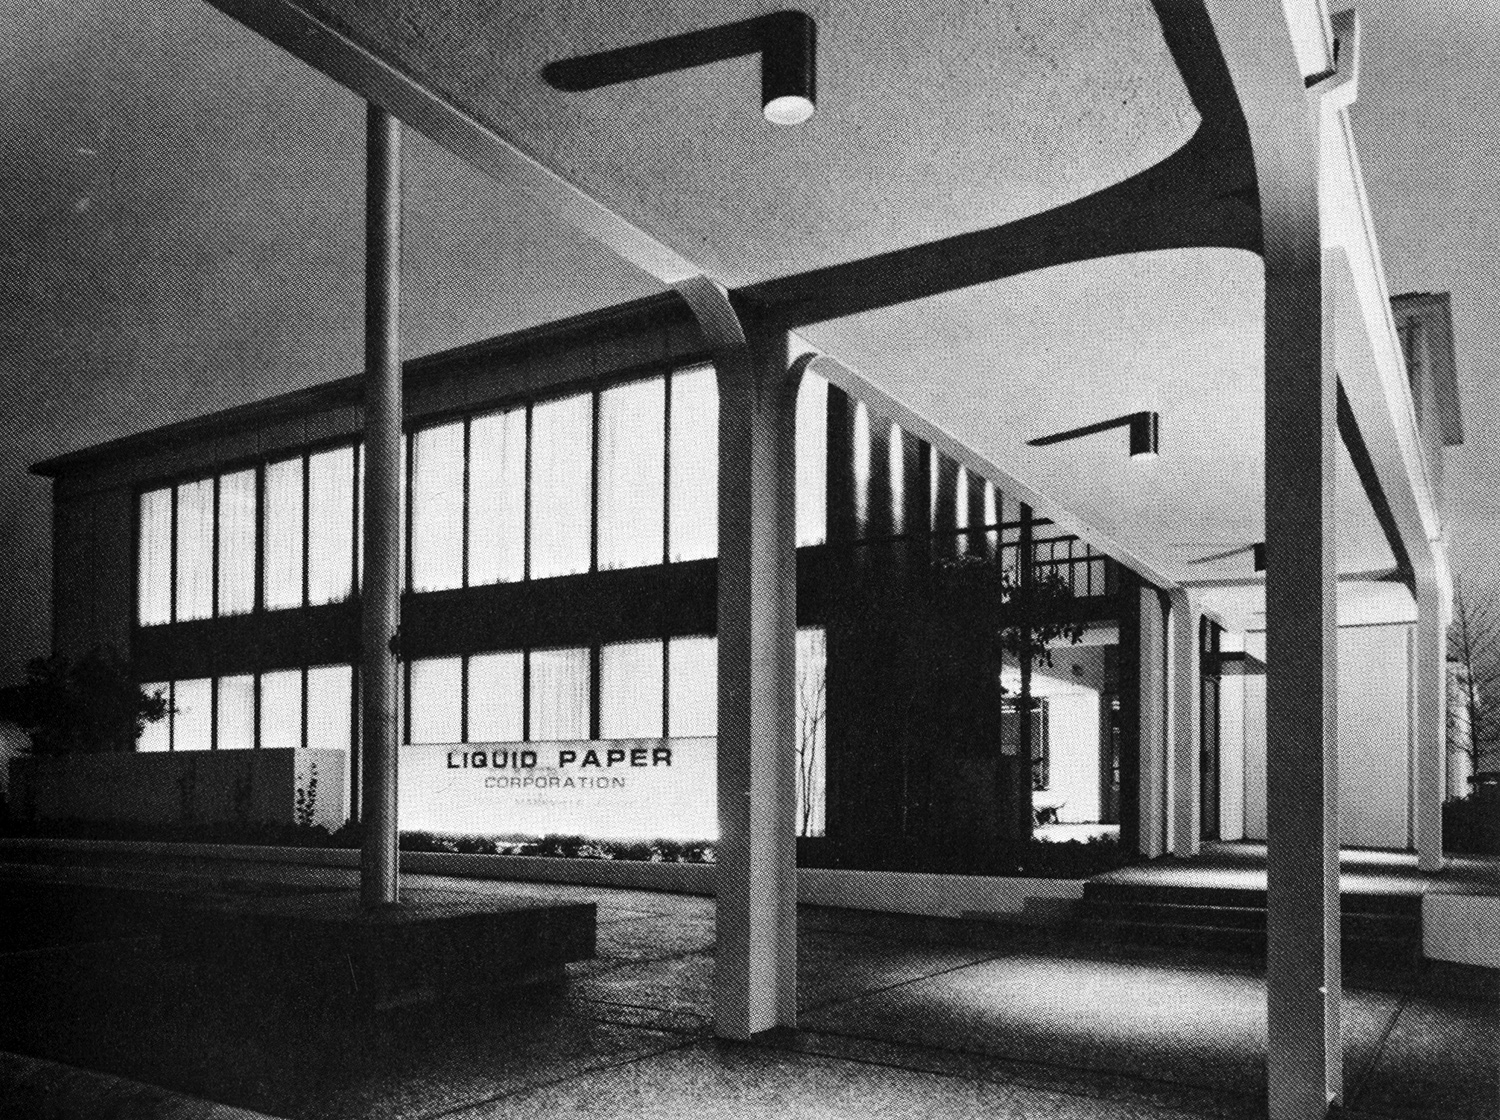 Black and white photograph showing front entrance view of Liquid Paper headquarters and manufacturing plant. The multistory building is made of concrete with a glass façade. 